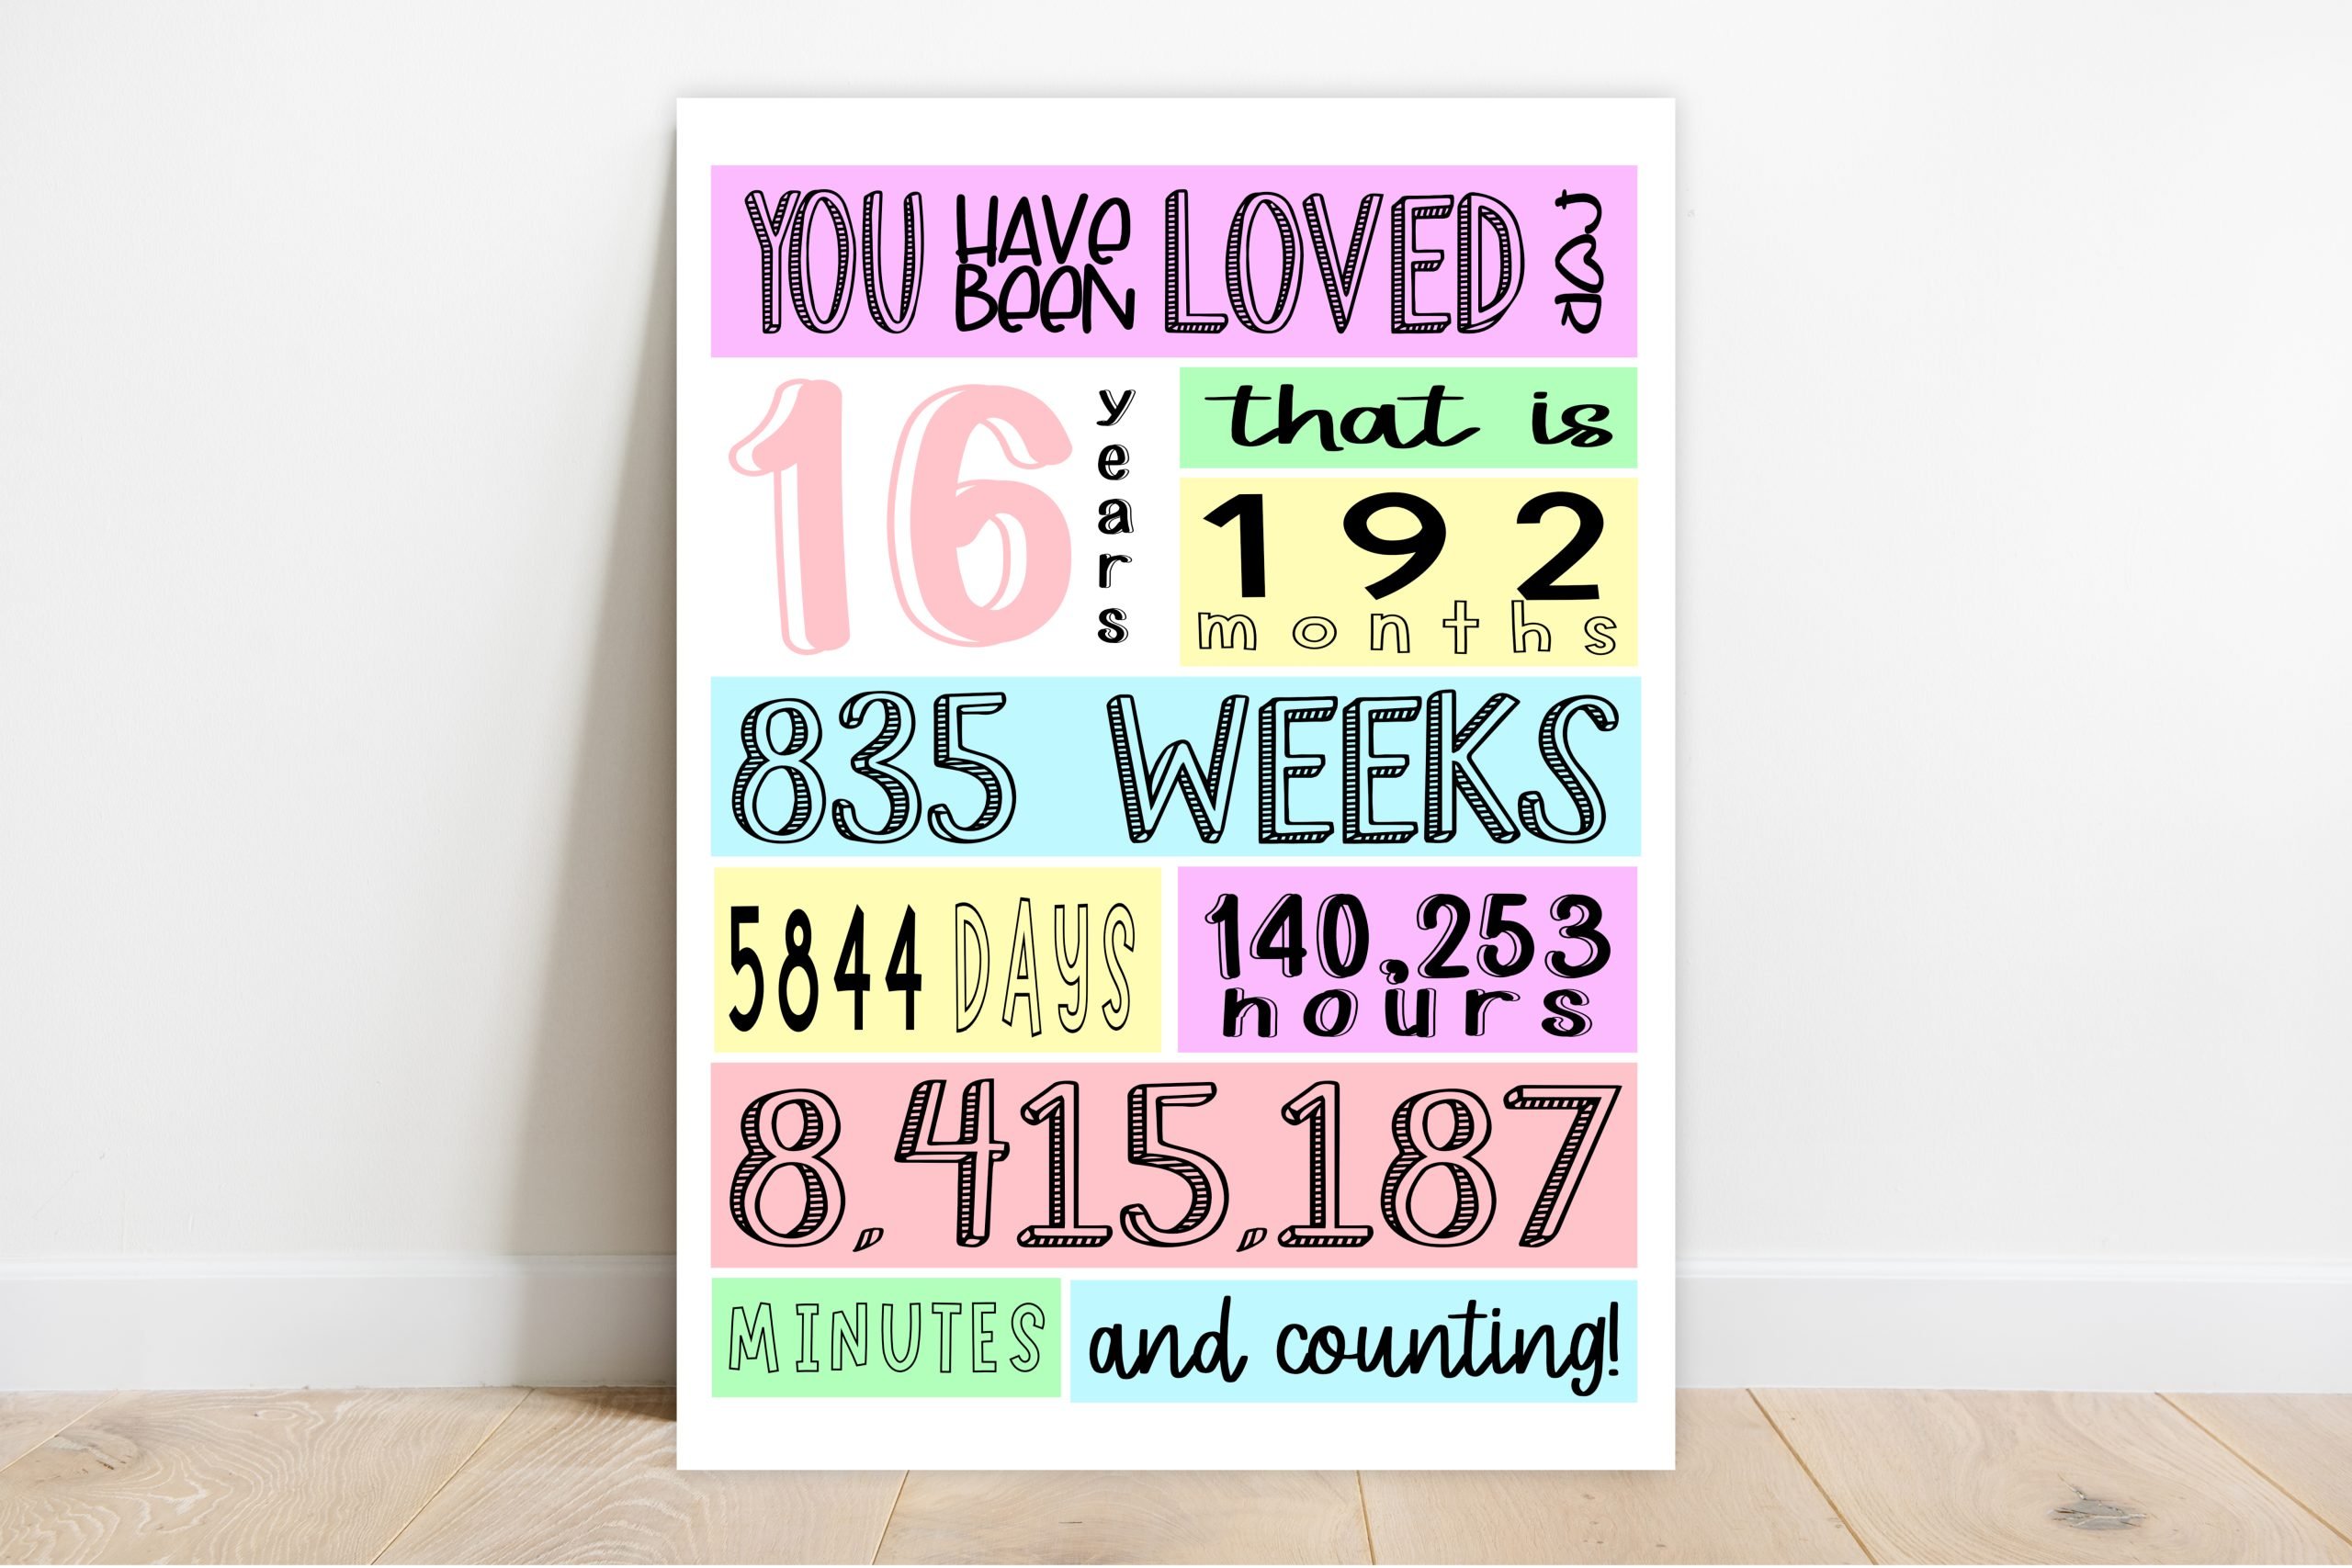 BIRTHDAY You Have Been Loved for 16 Years: Printable Sweet 16 Birthday Poster Decor Sign 16th birthday